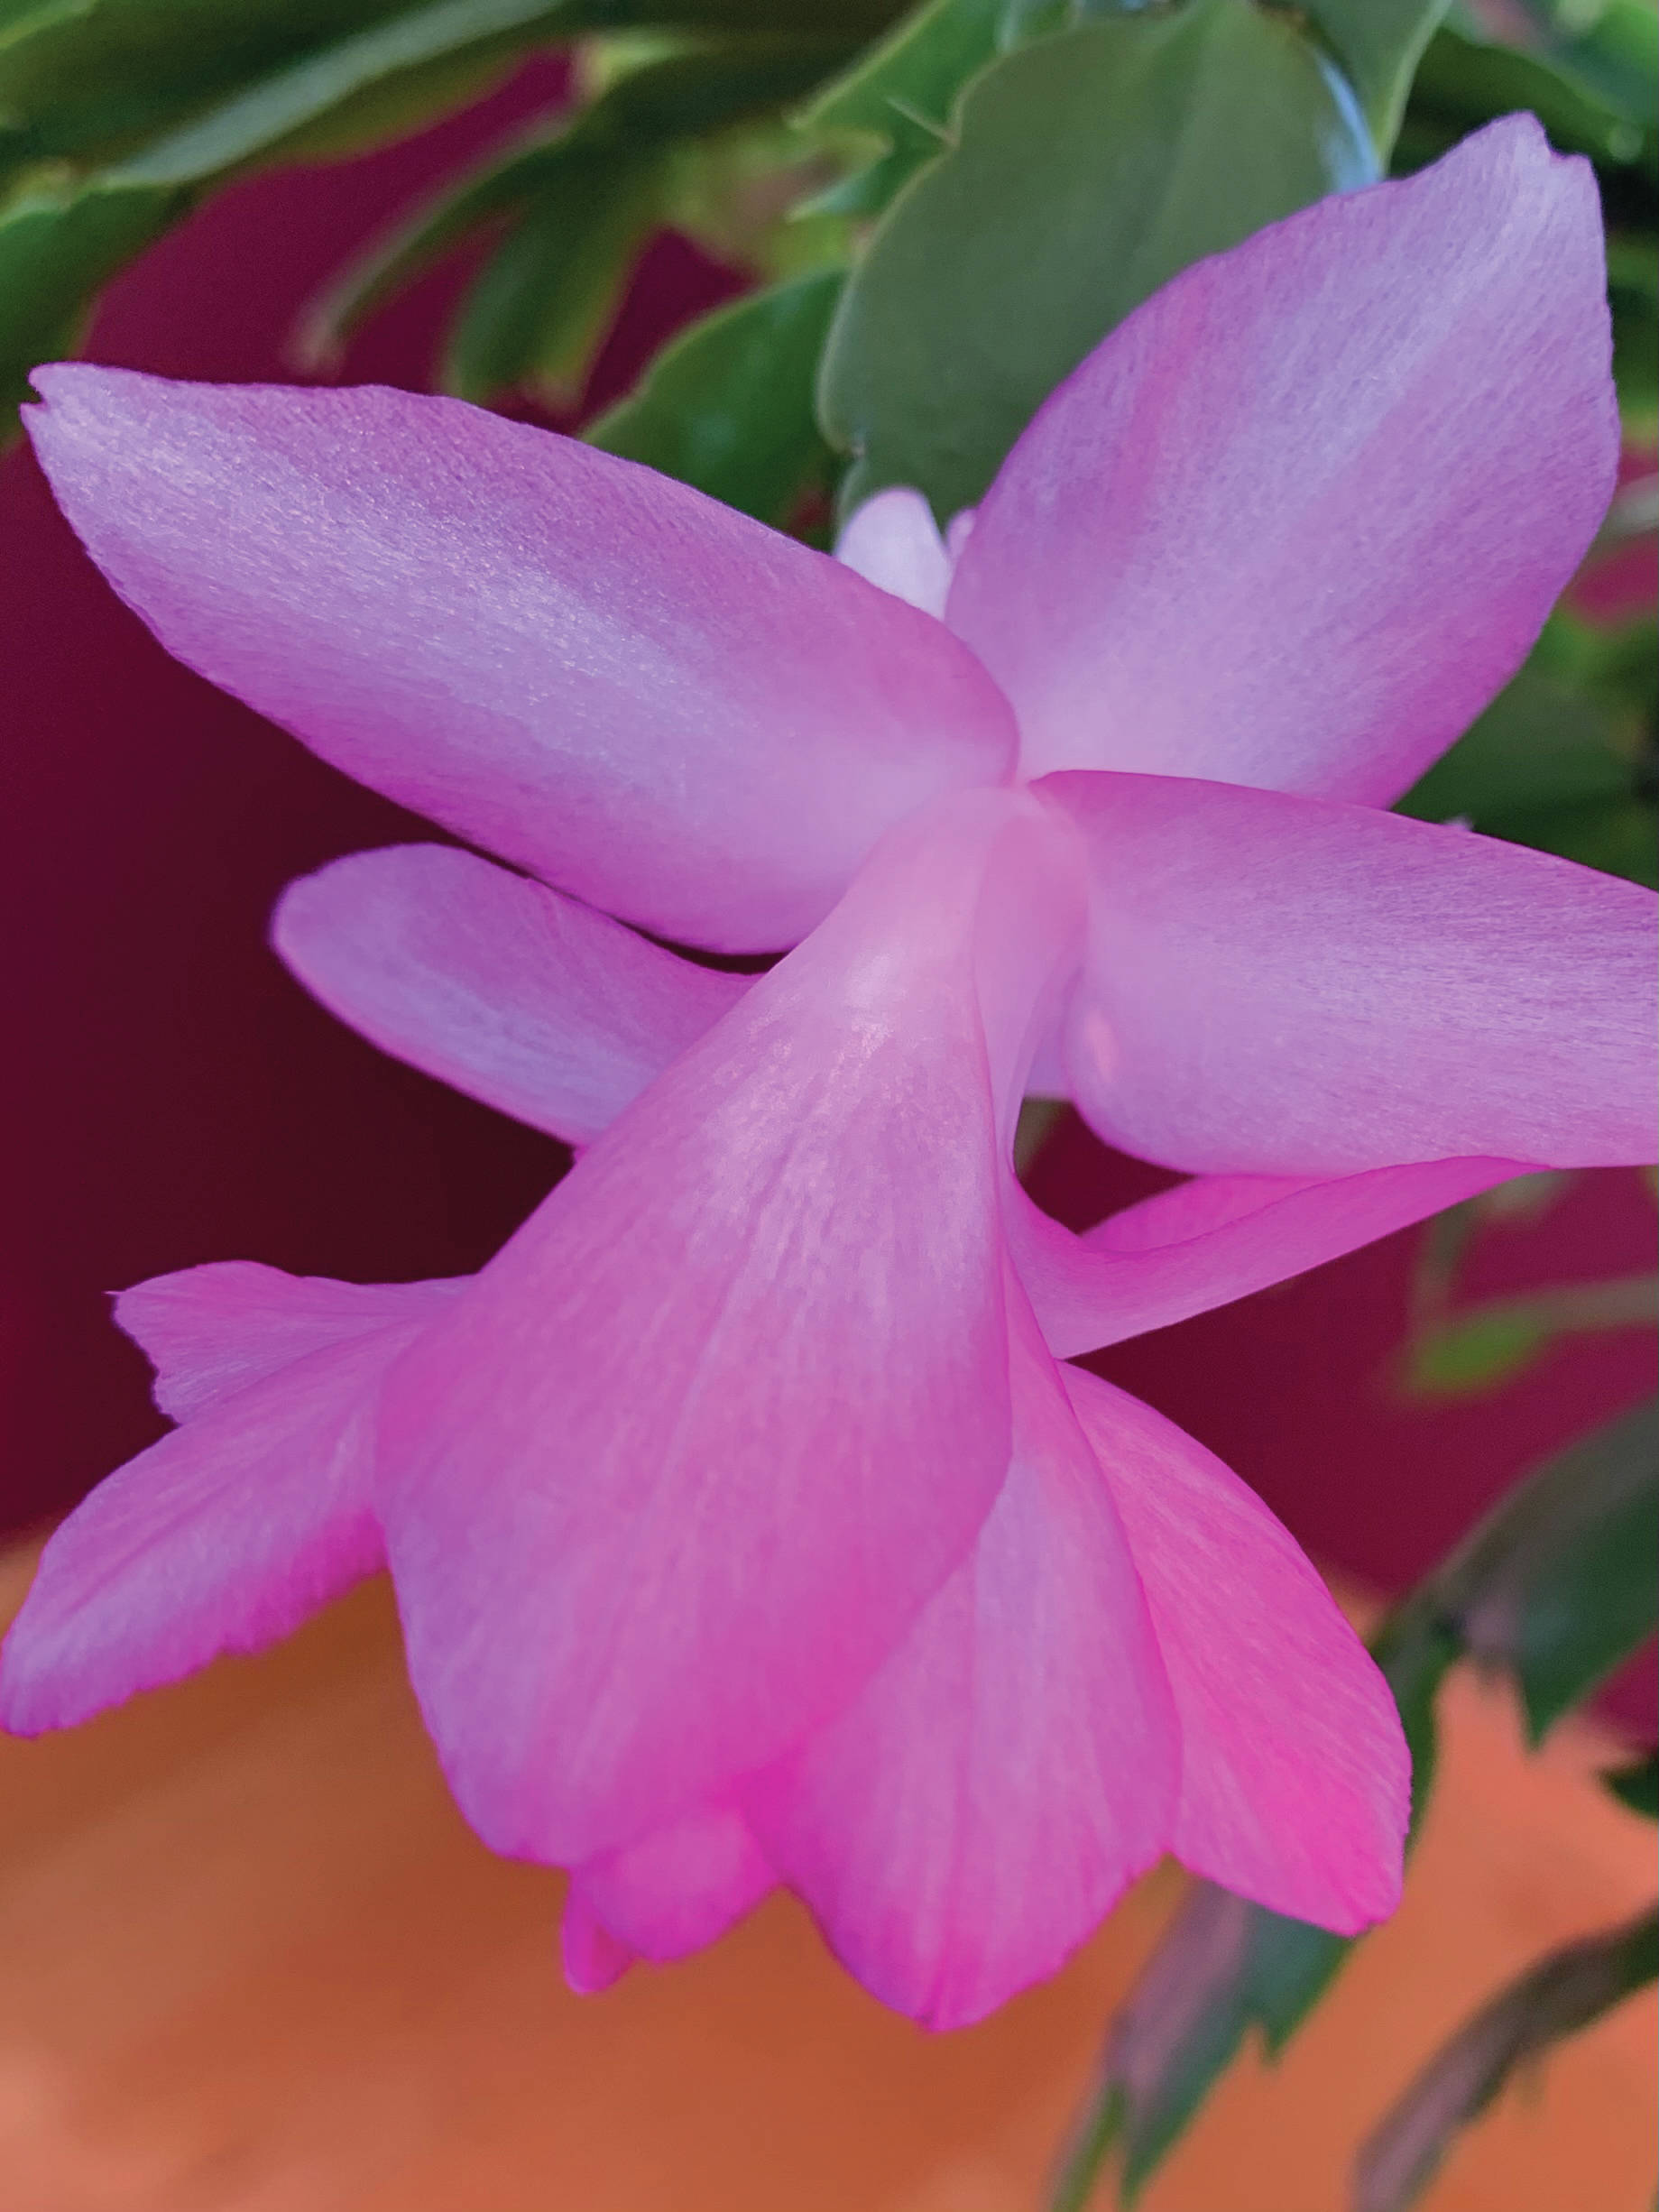 “The perfect pink of the epiphytic cactus that I picked up at the grocery store years ago reliably blooms two or three times a year,” the Kachemak Gardener said of this flower blooming on Sunday, March 21, 2021, at her Homer, Alaska, home. (Photo by Rosemary Fitzpatrick)